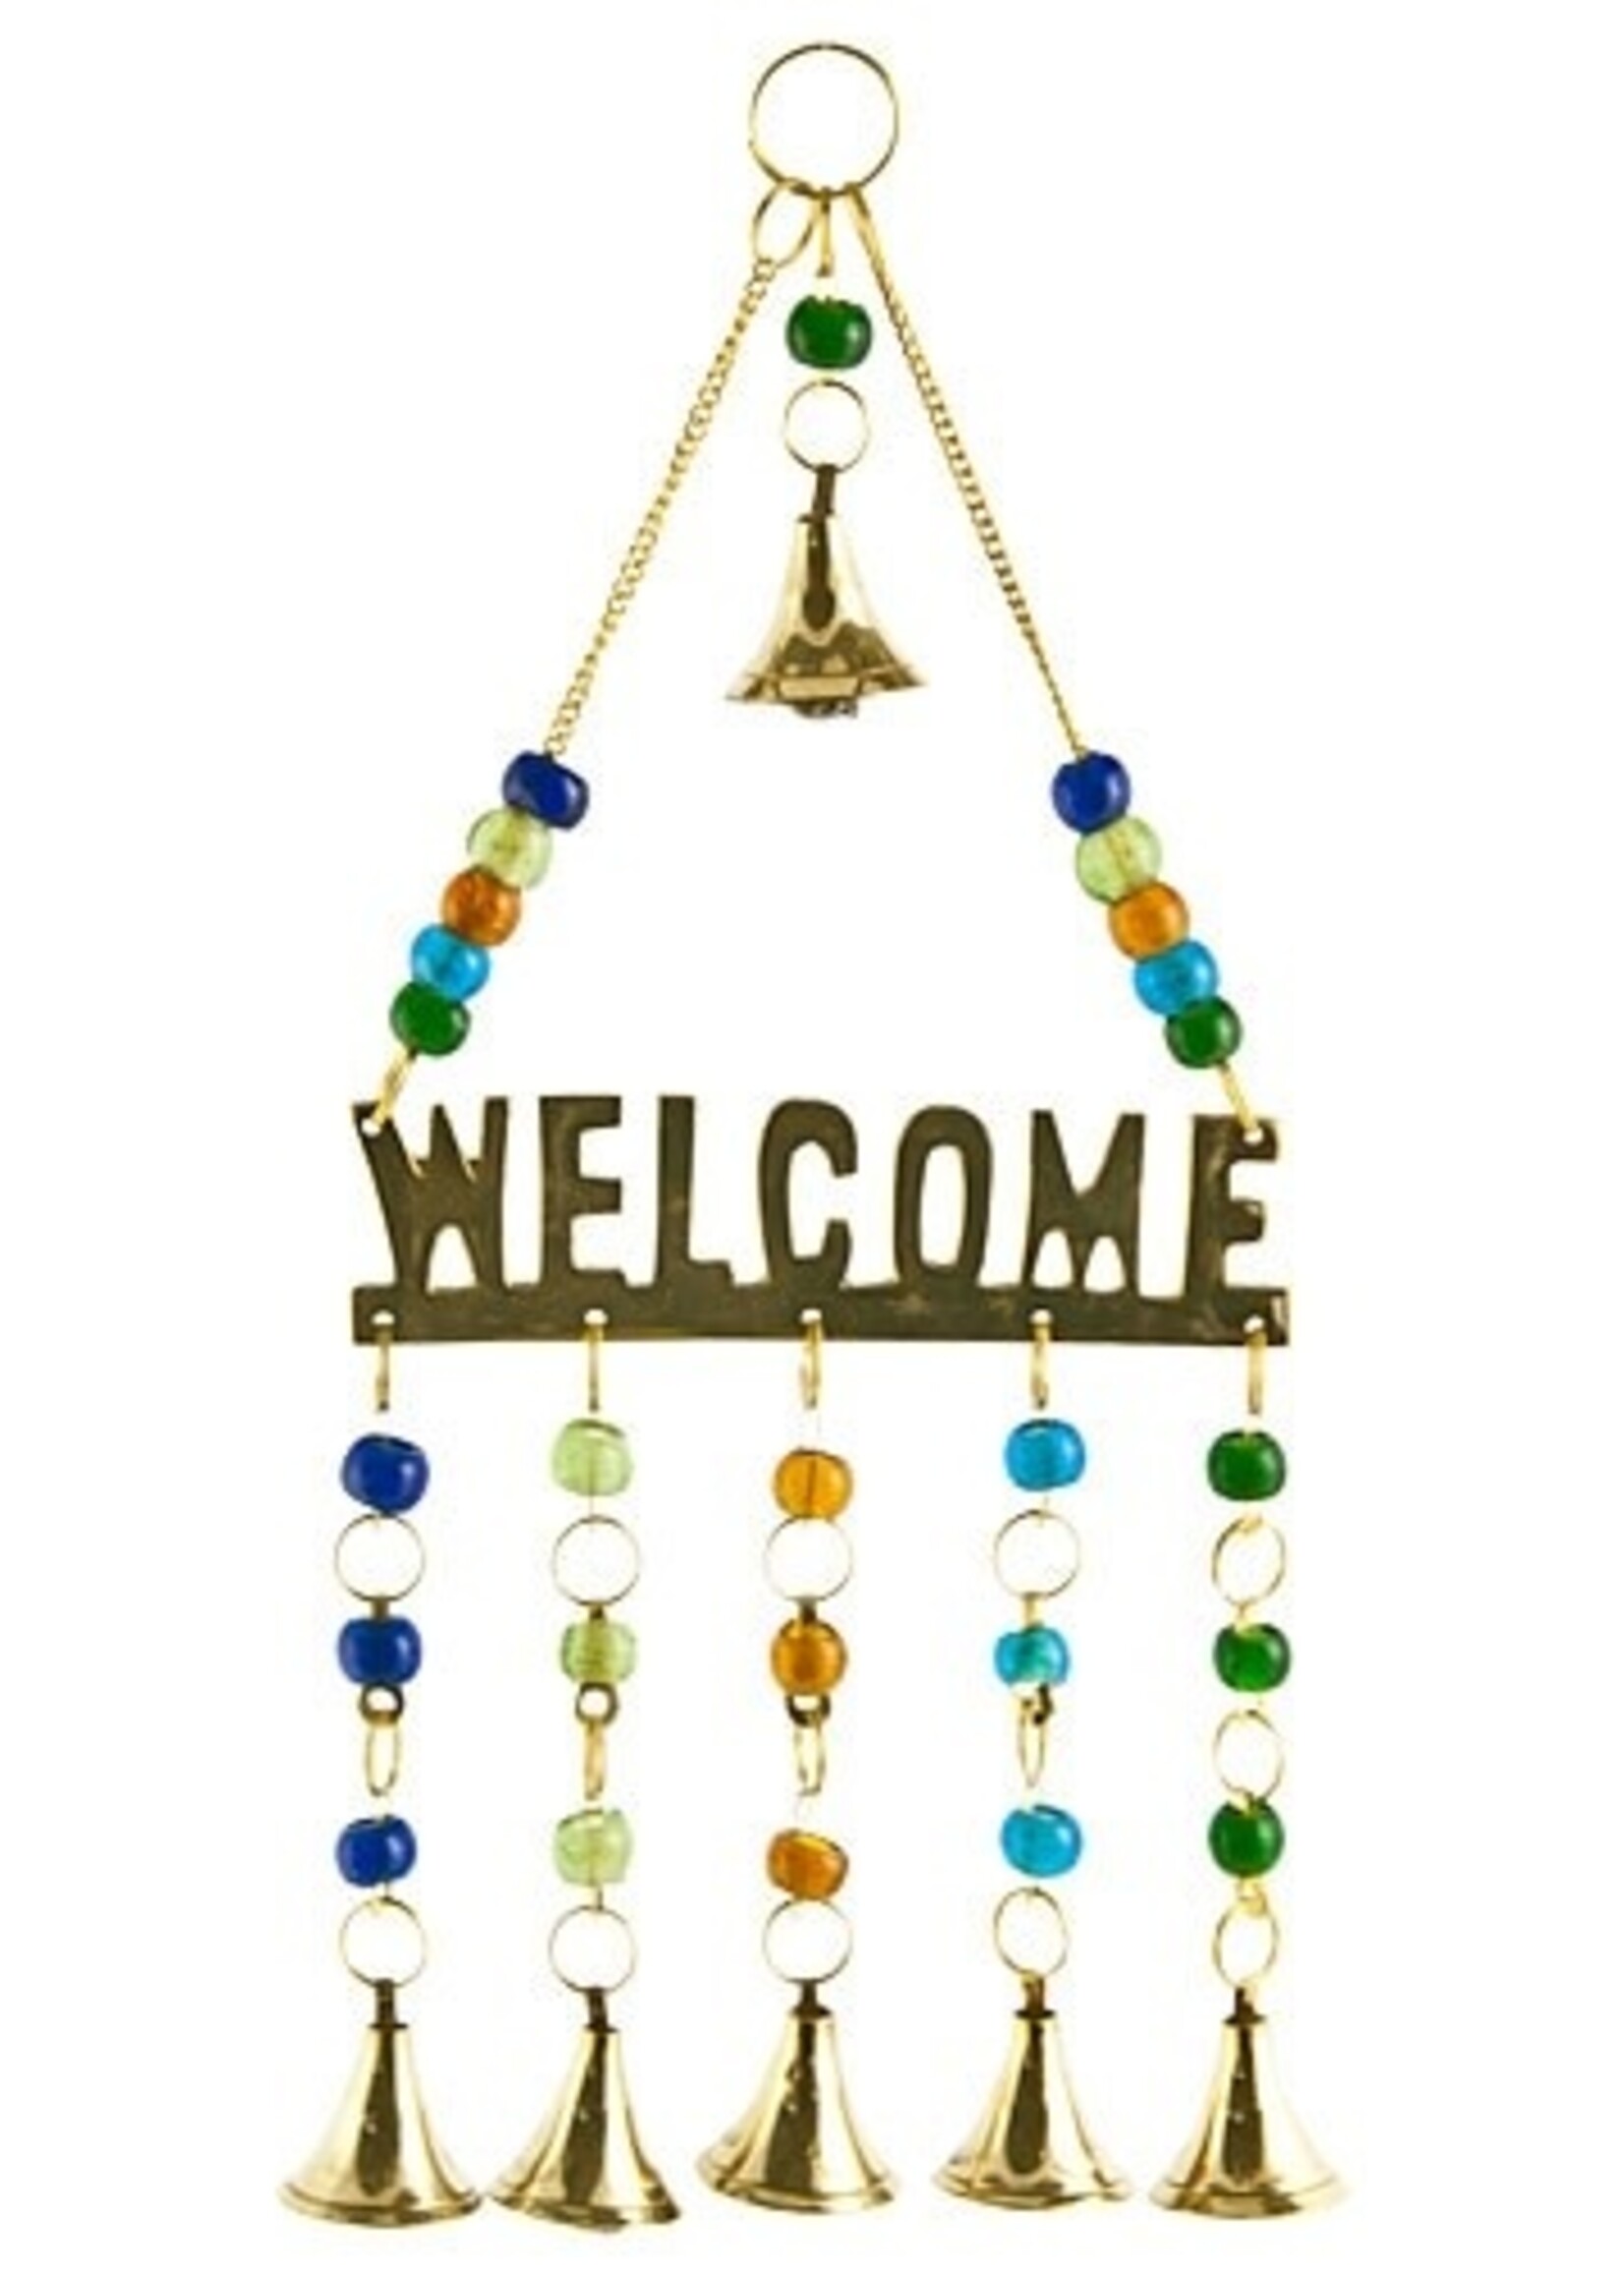 Welcome Chime with Beads, 9"